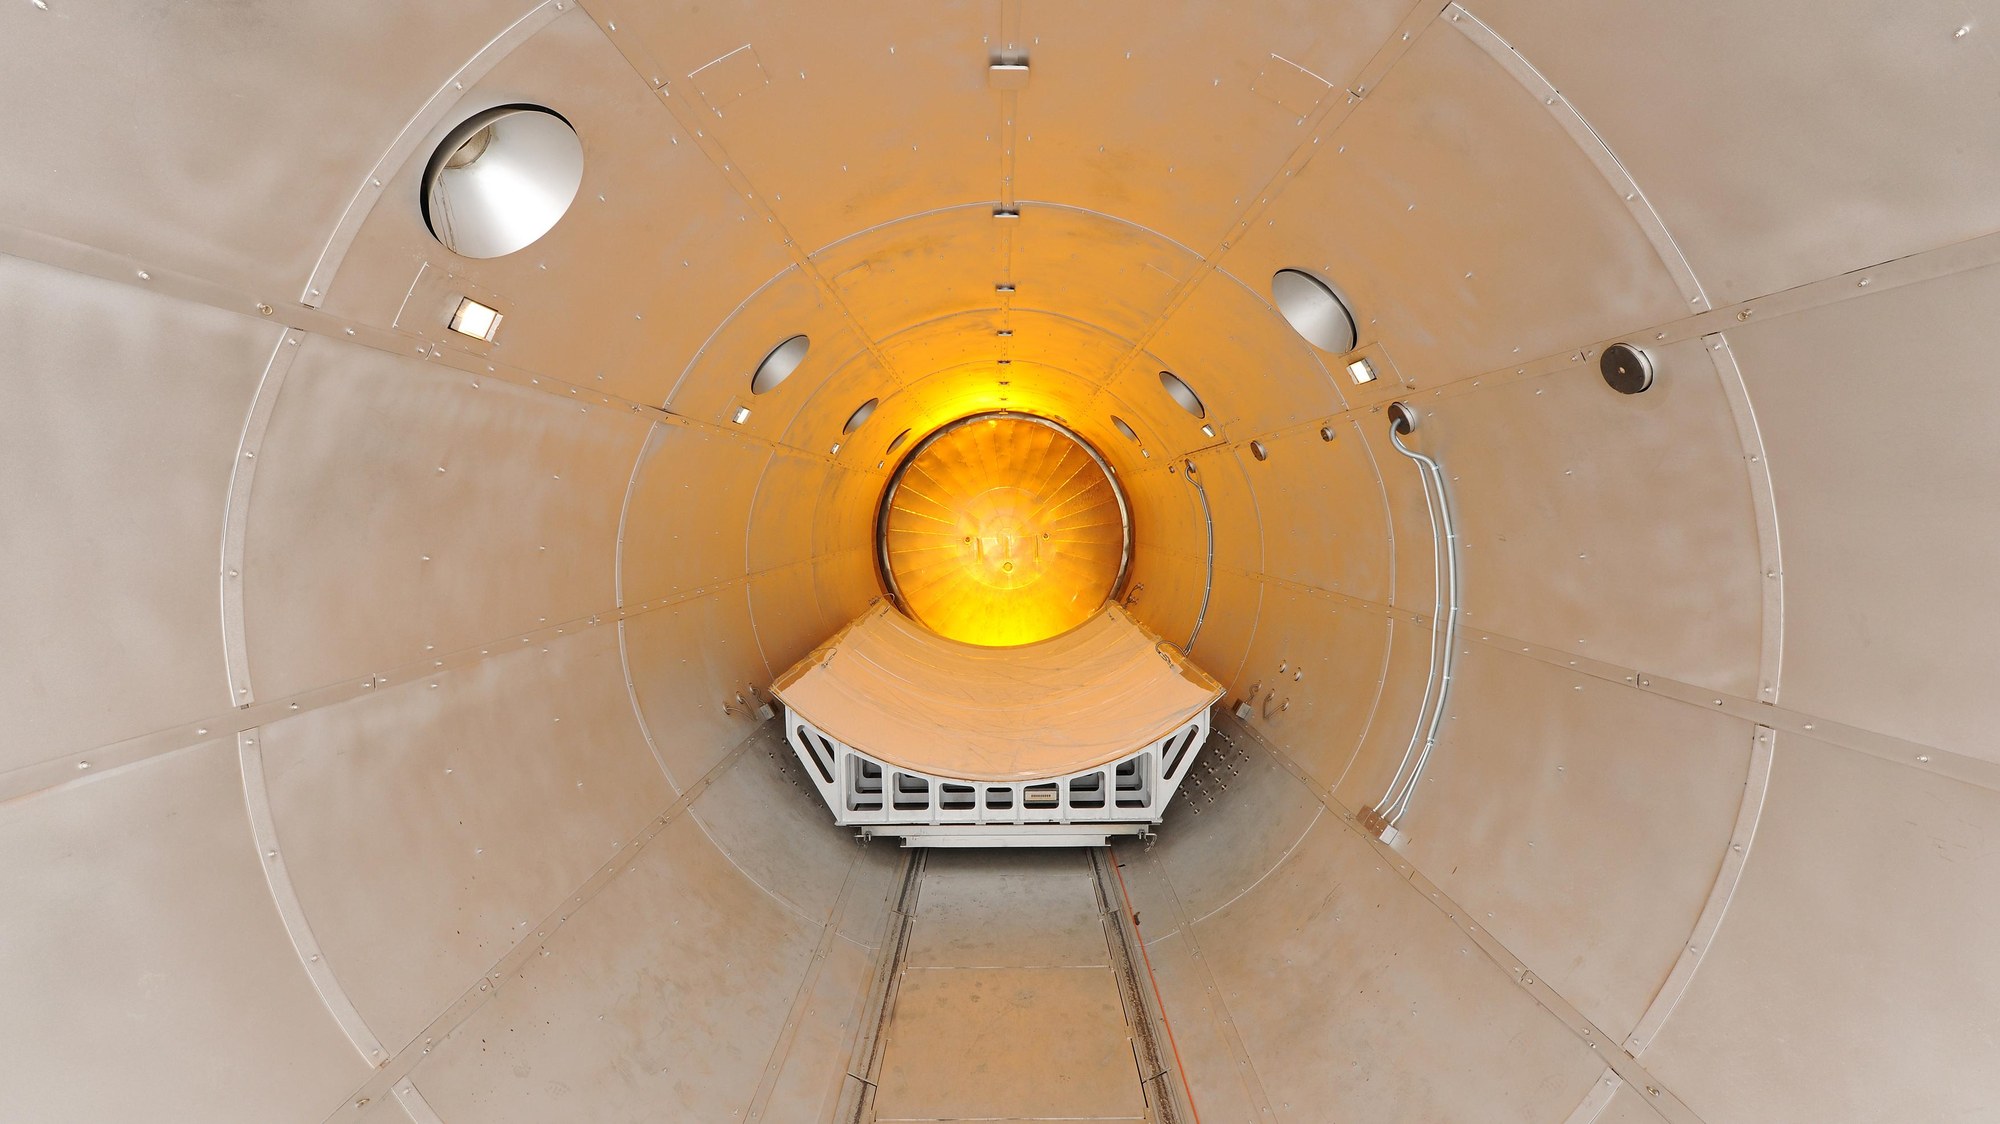 BALU autoclave from the inside